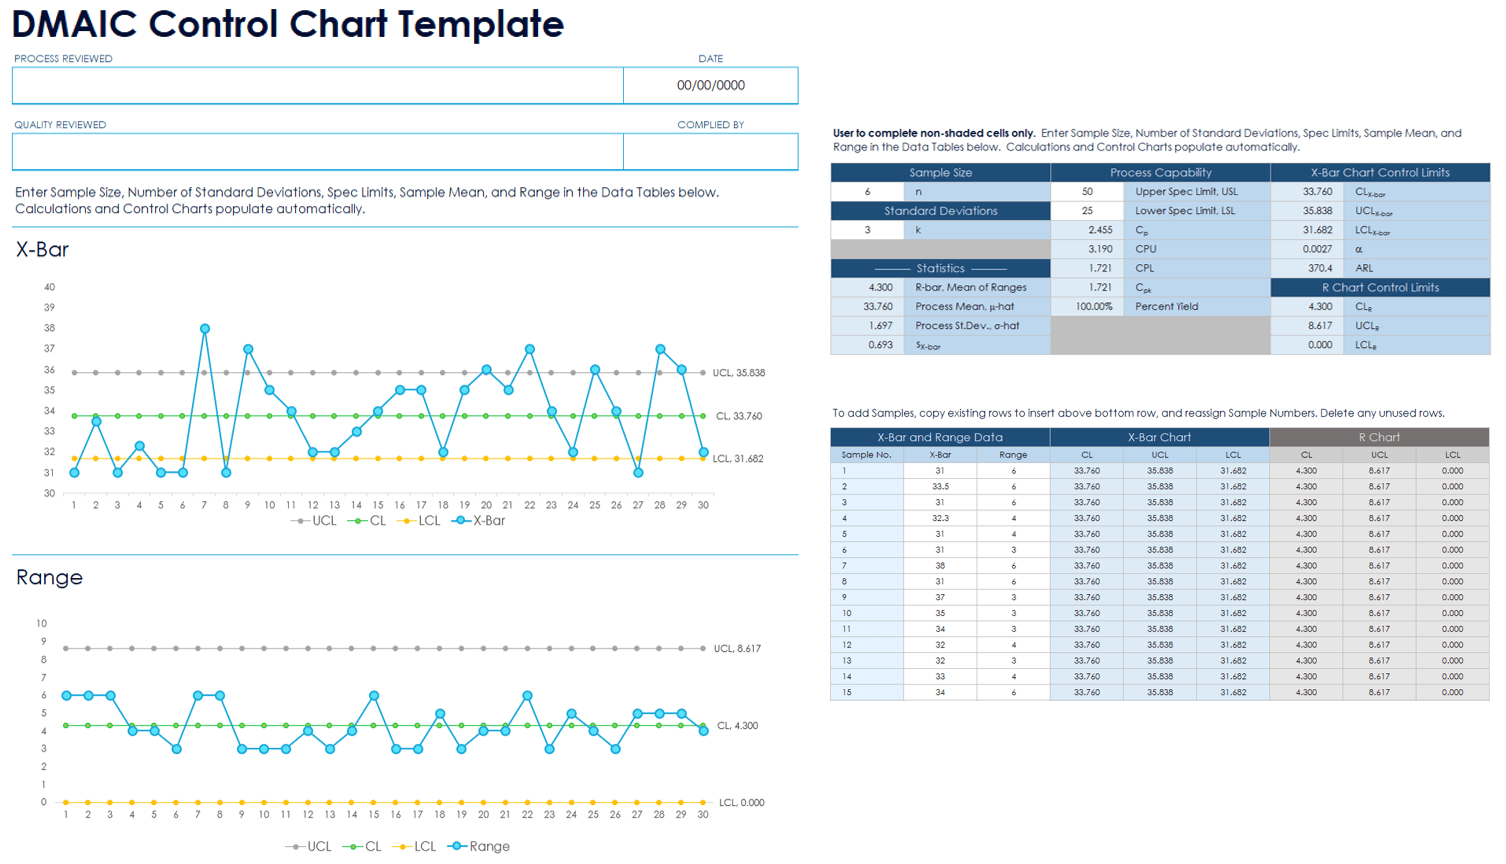 DMAIC Control Chart Template